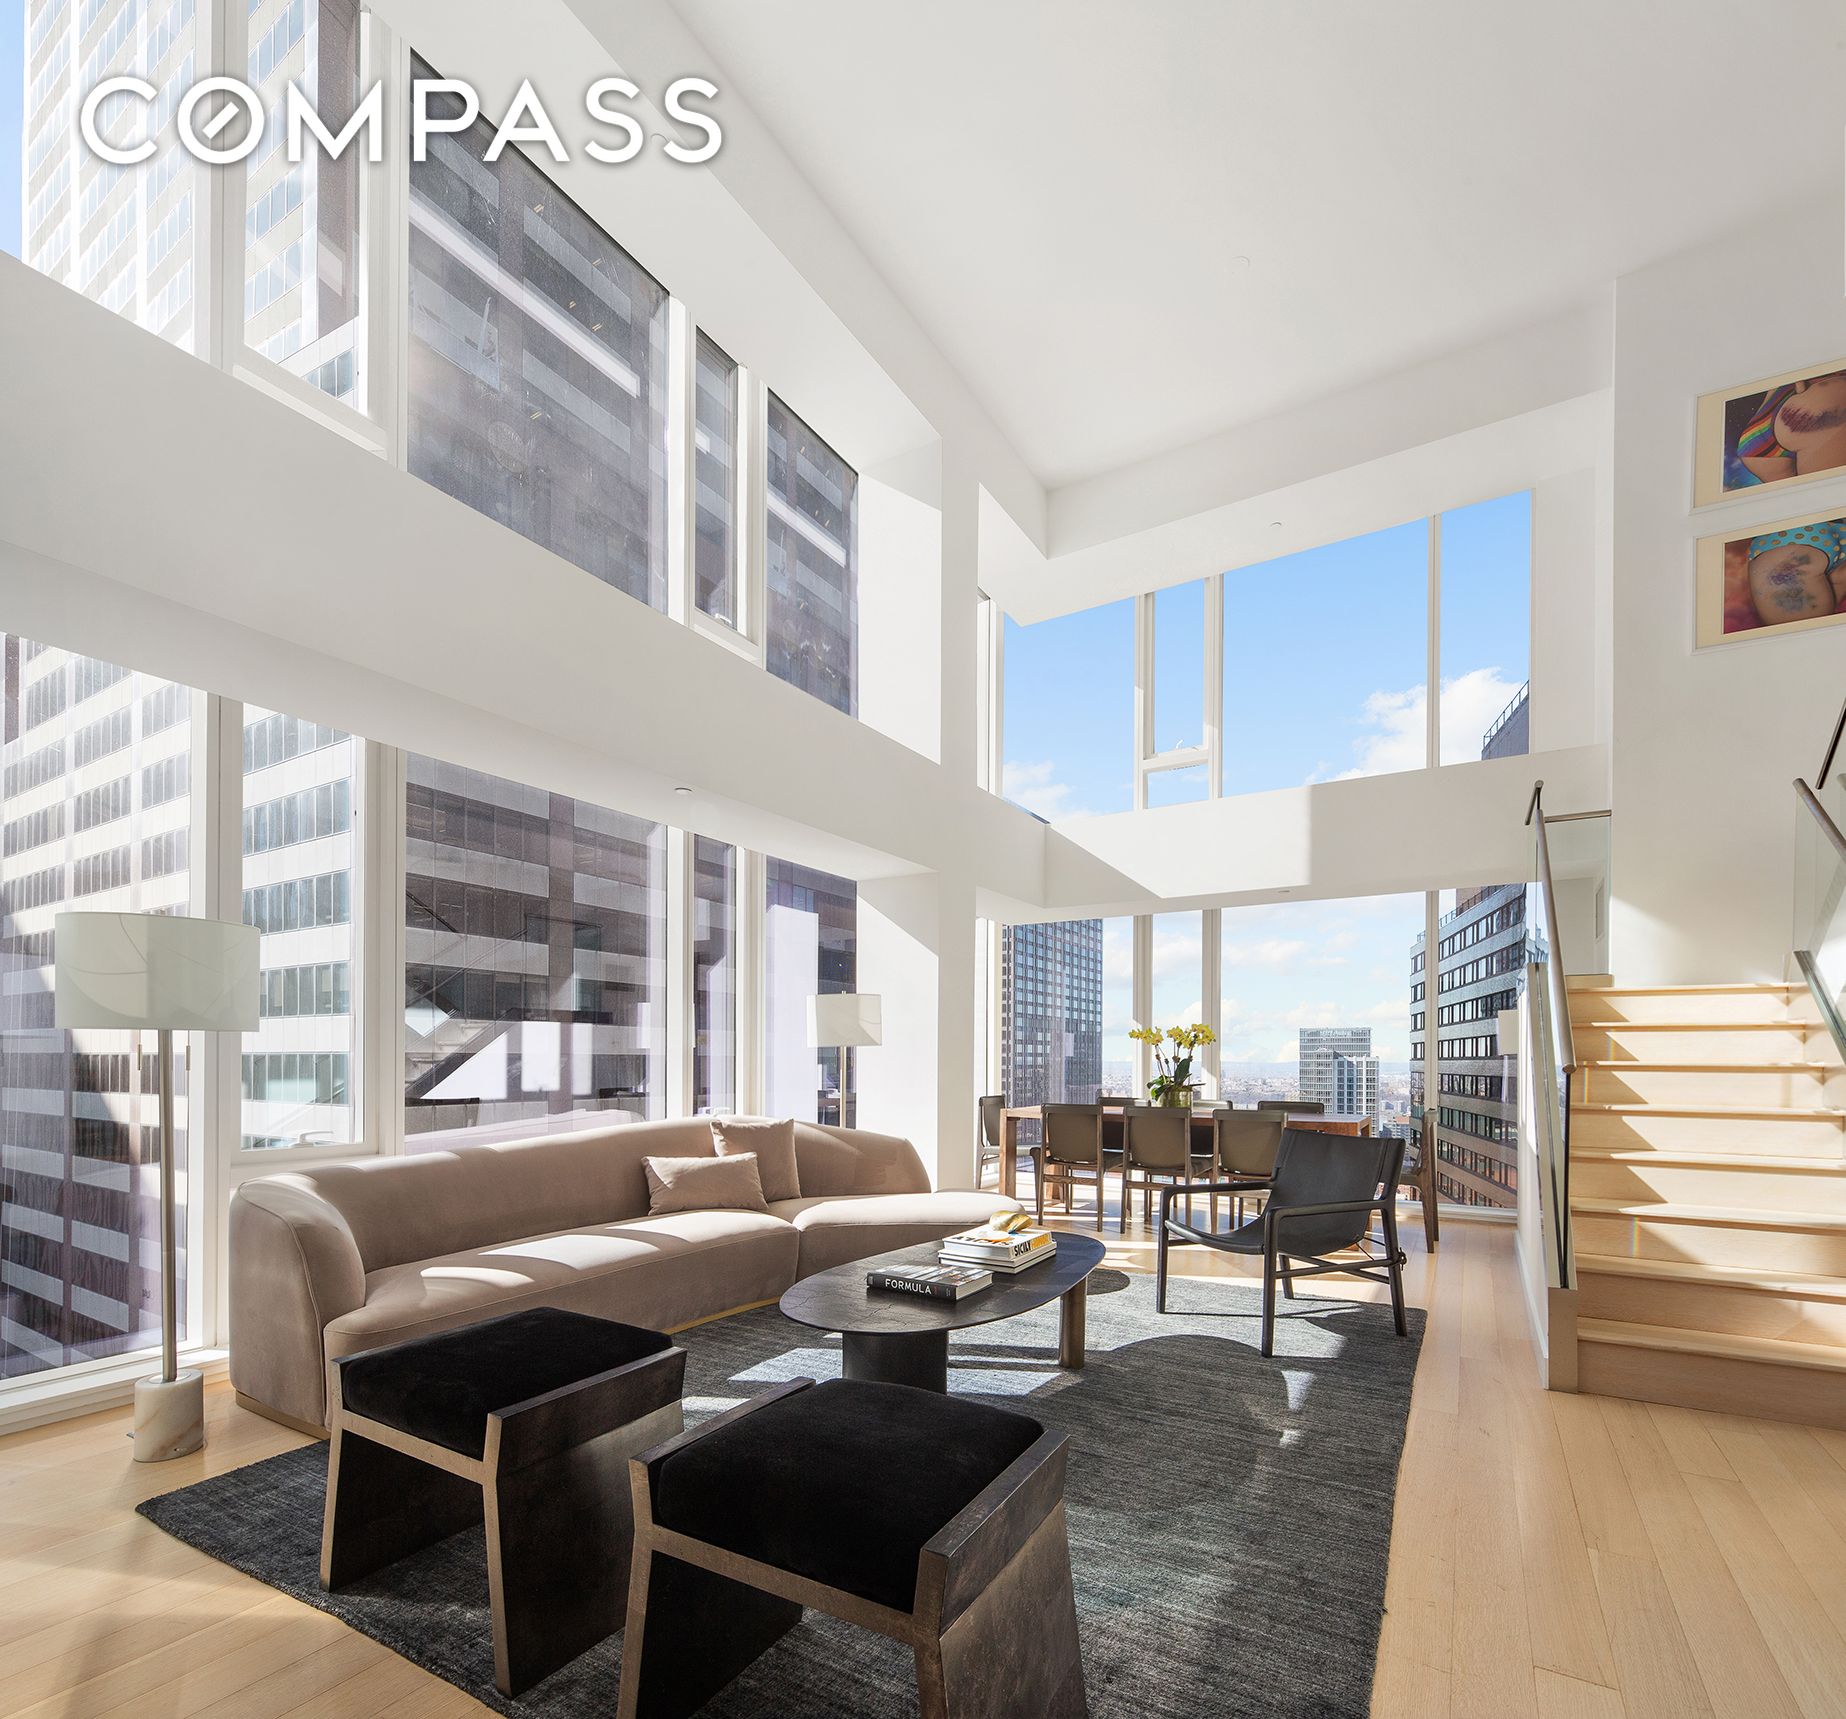 135 West 52nd Street Ph3, Theater District, Midtown West, NYC - 3 Bedrooms  
3.5 Bathrooms  
6 Rooms - 